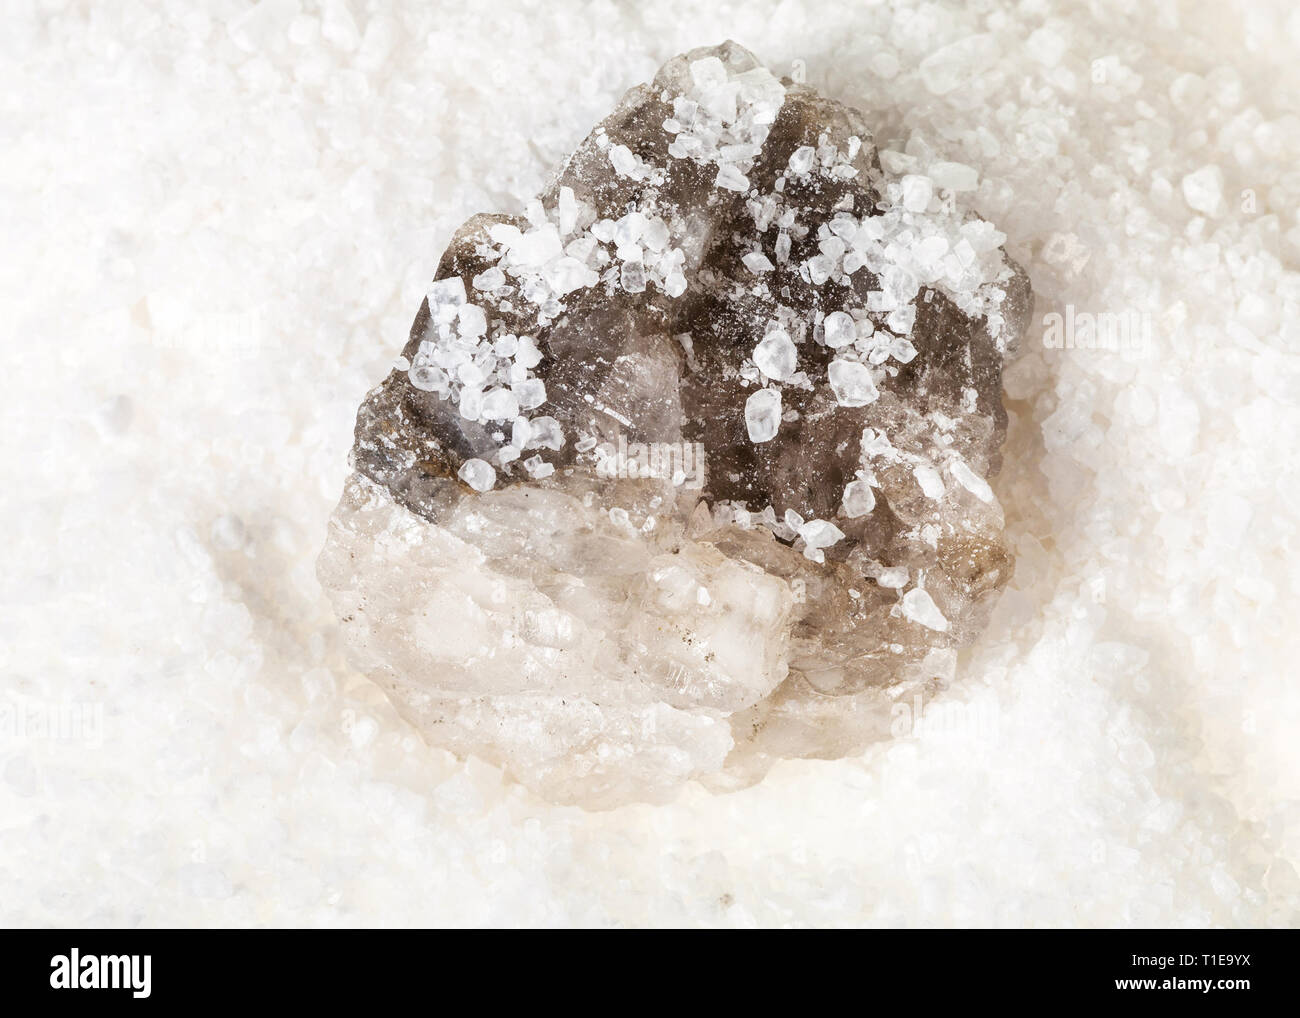 top view of raw Halite mineral in grained Rock Salt close up Stock Photo